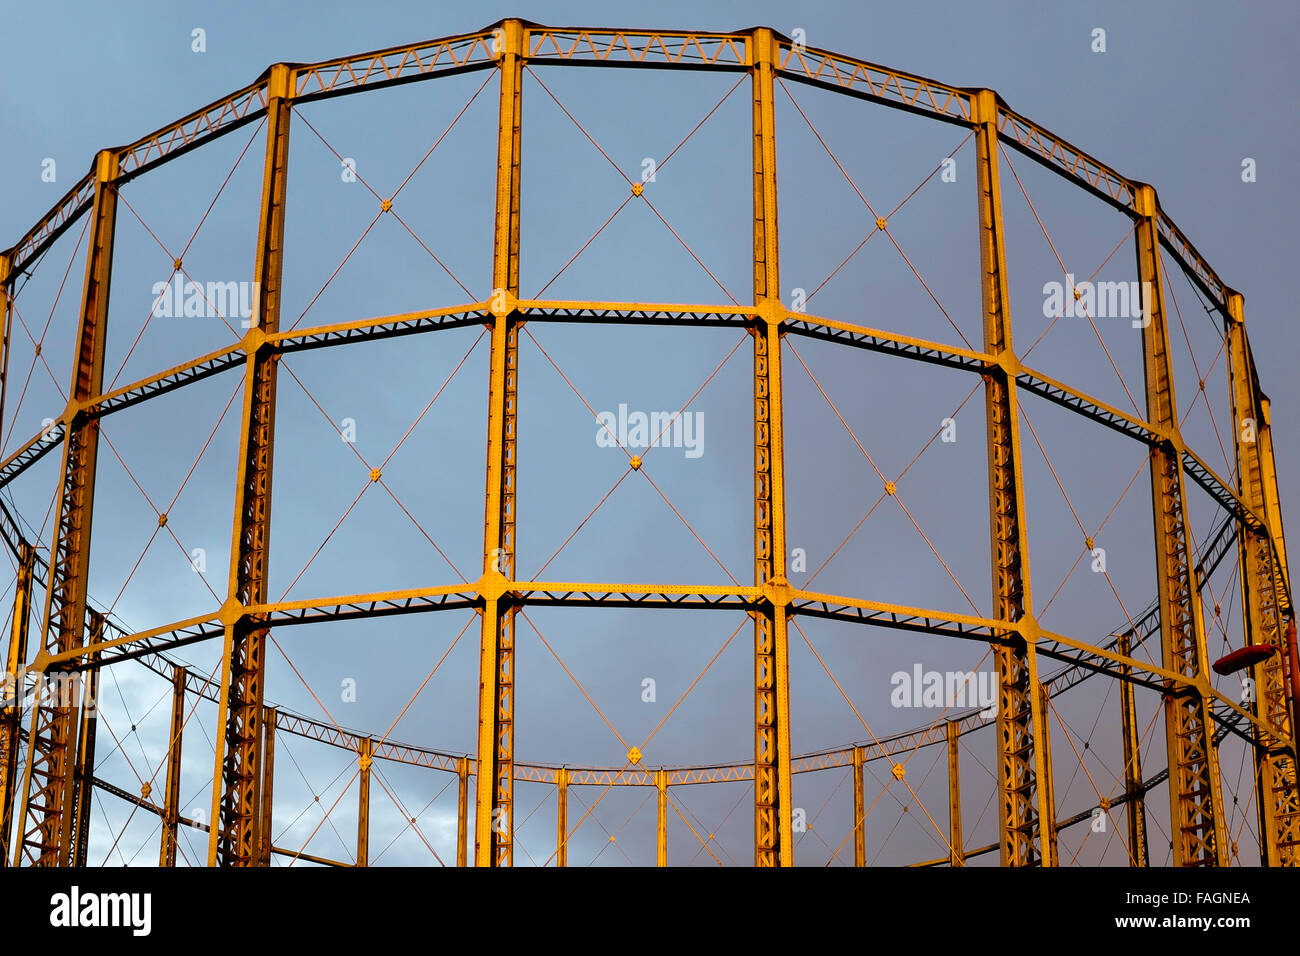 The Garston Gas holders at sunset. Once important industrial infrastructure, they are fast disappearing. South Liverpool, UK Stock Photo